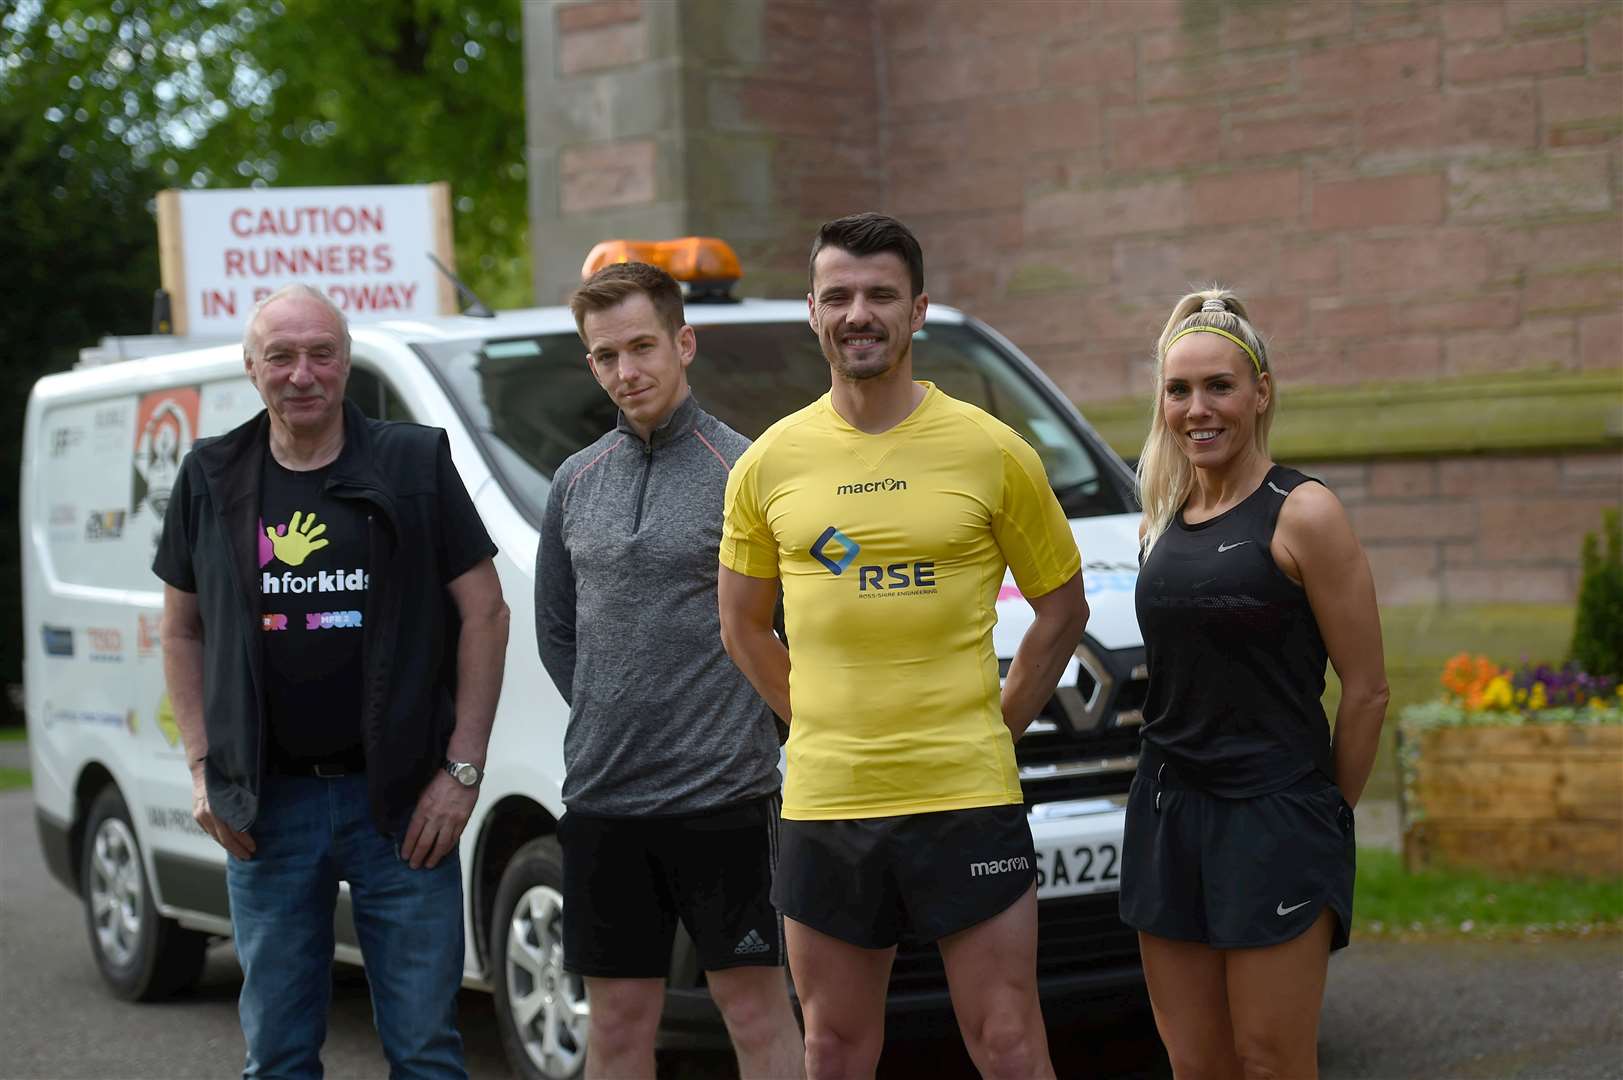 Steven Mackay is running the 516 miles of the North Coast 500 (NC500) in just 10 days. From left, Donald Grant (driver), Andrew Macleod, Steven Mackay and Kellie Calder. Picture: Callum Mackay